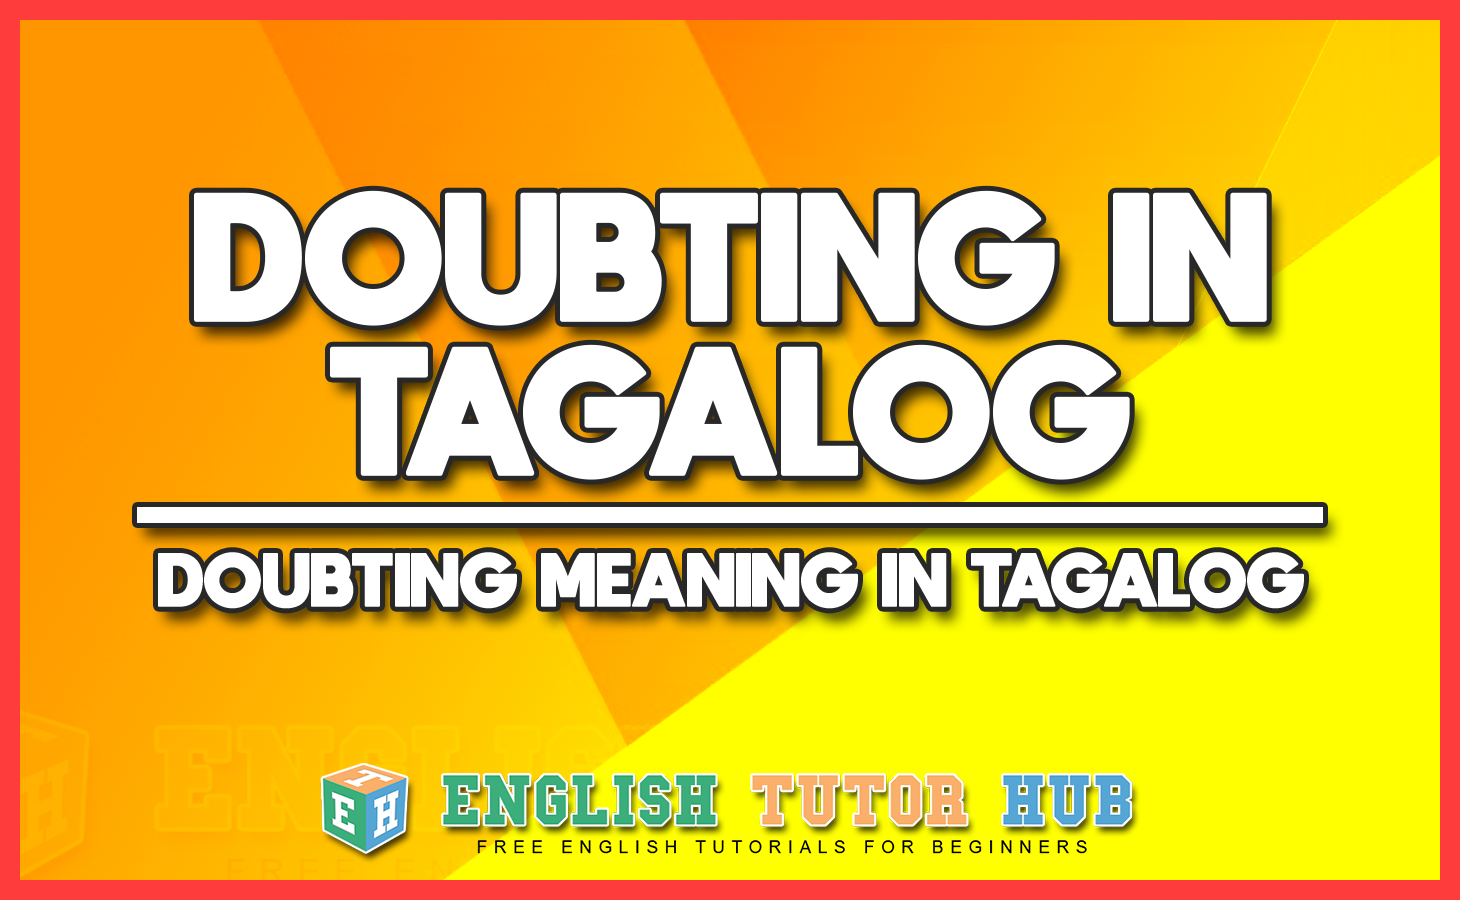 DOUBTING IN TAGALOG - DOUBTING MEANING IN TAGALOG